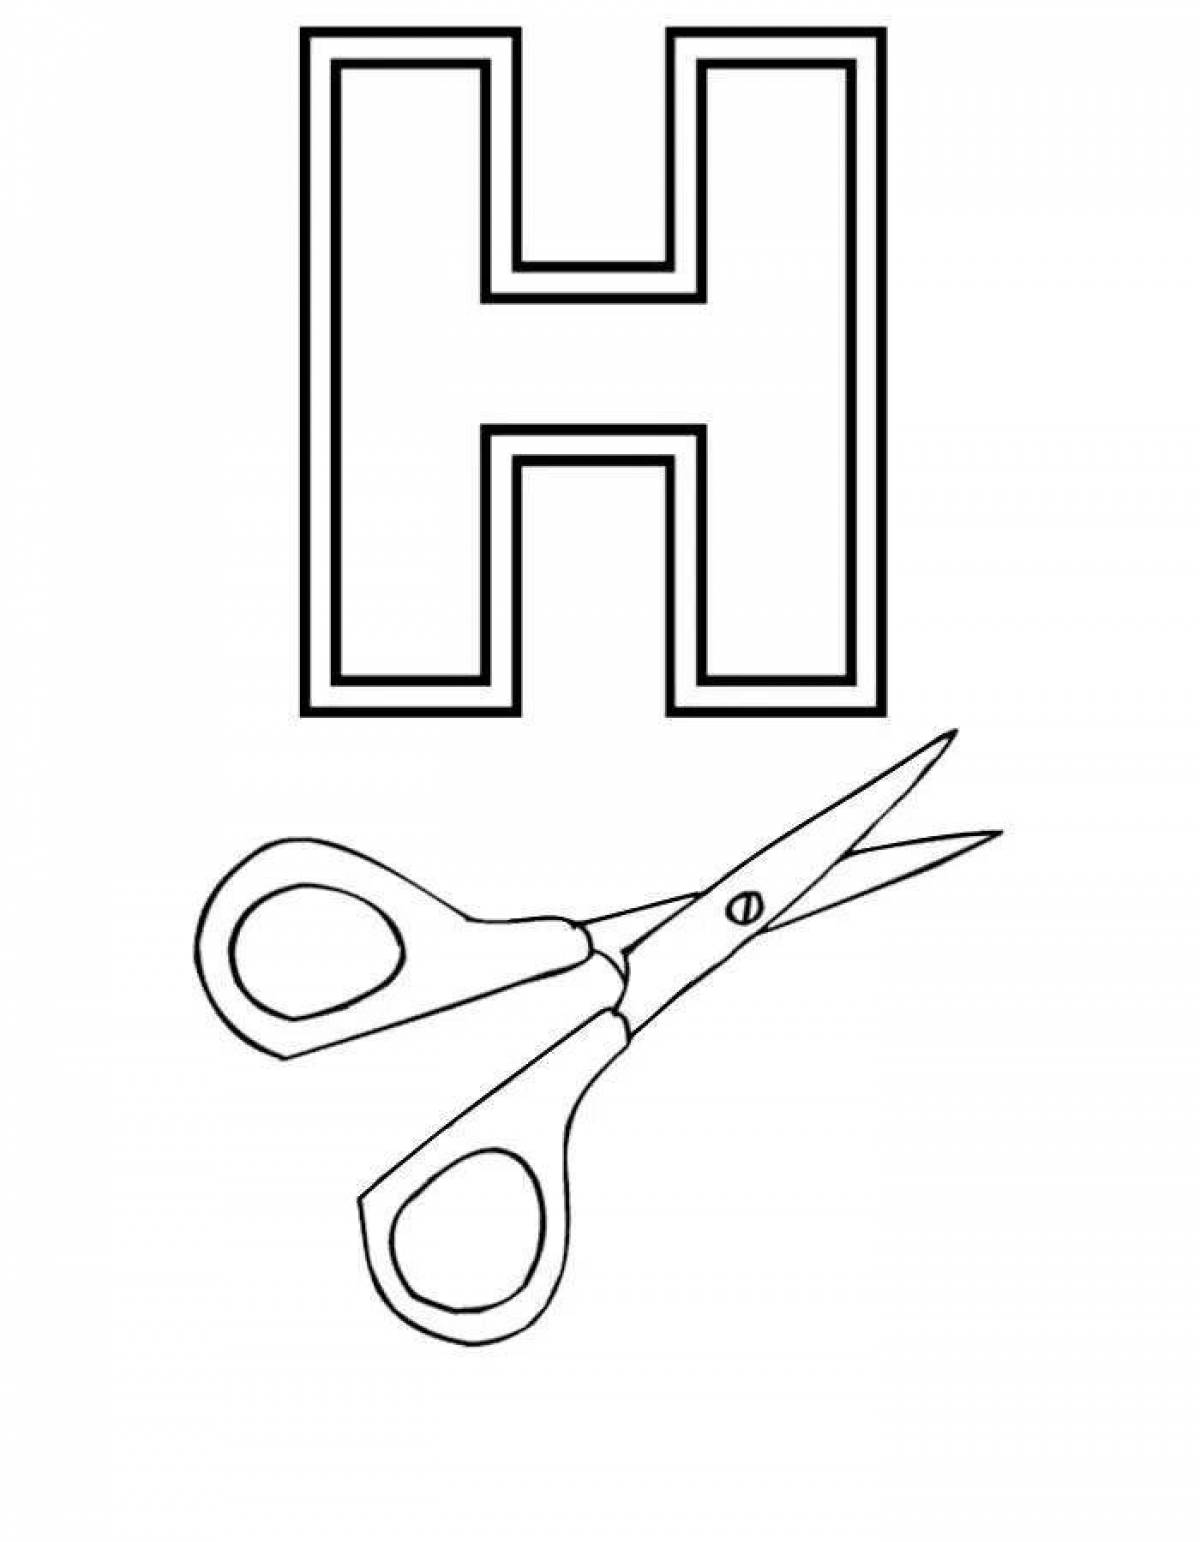 Playful russian letters coloring page